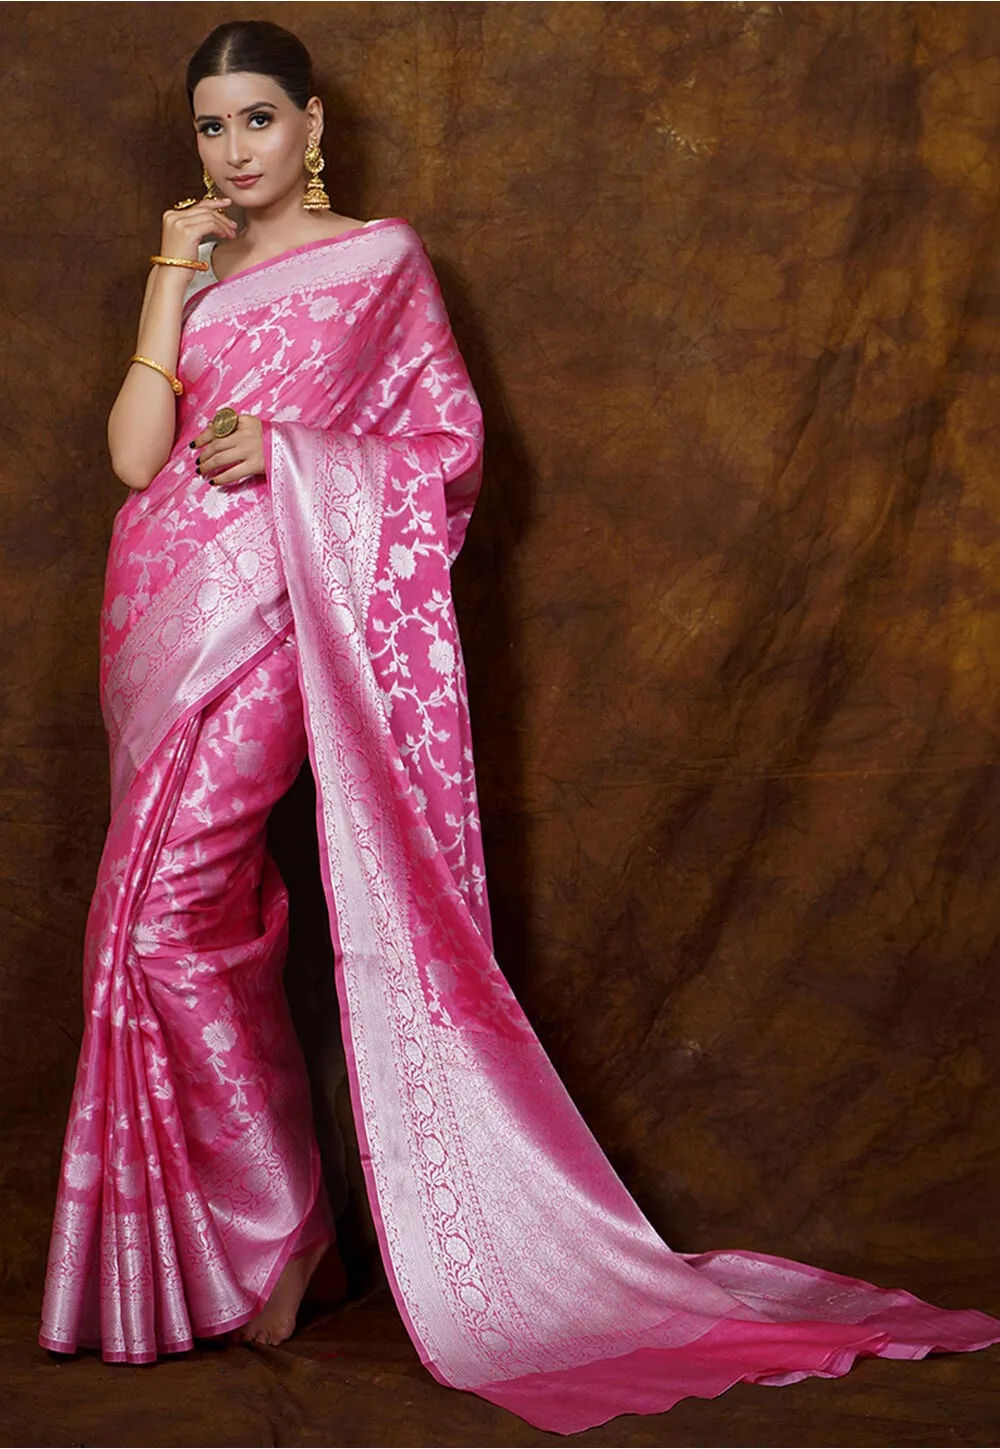 Printed Sarees To Liven Up Your Bland Look | Utsav Edit